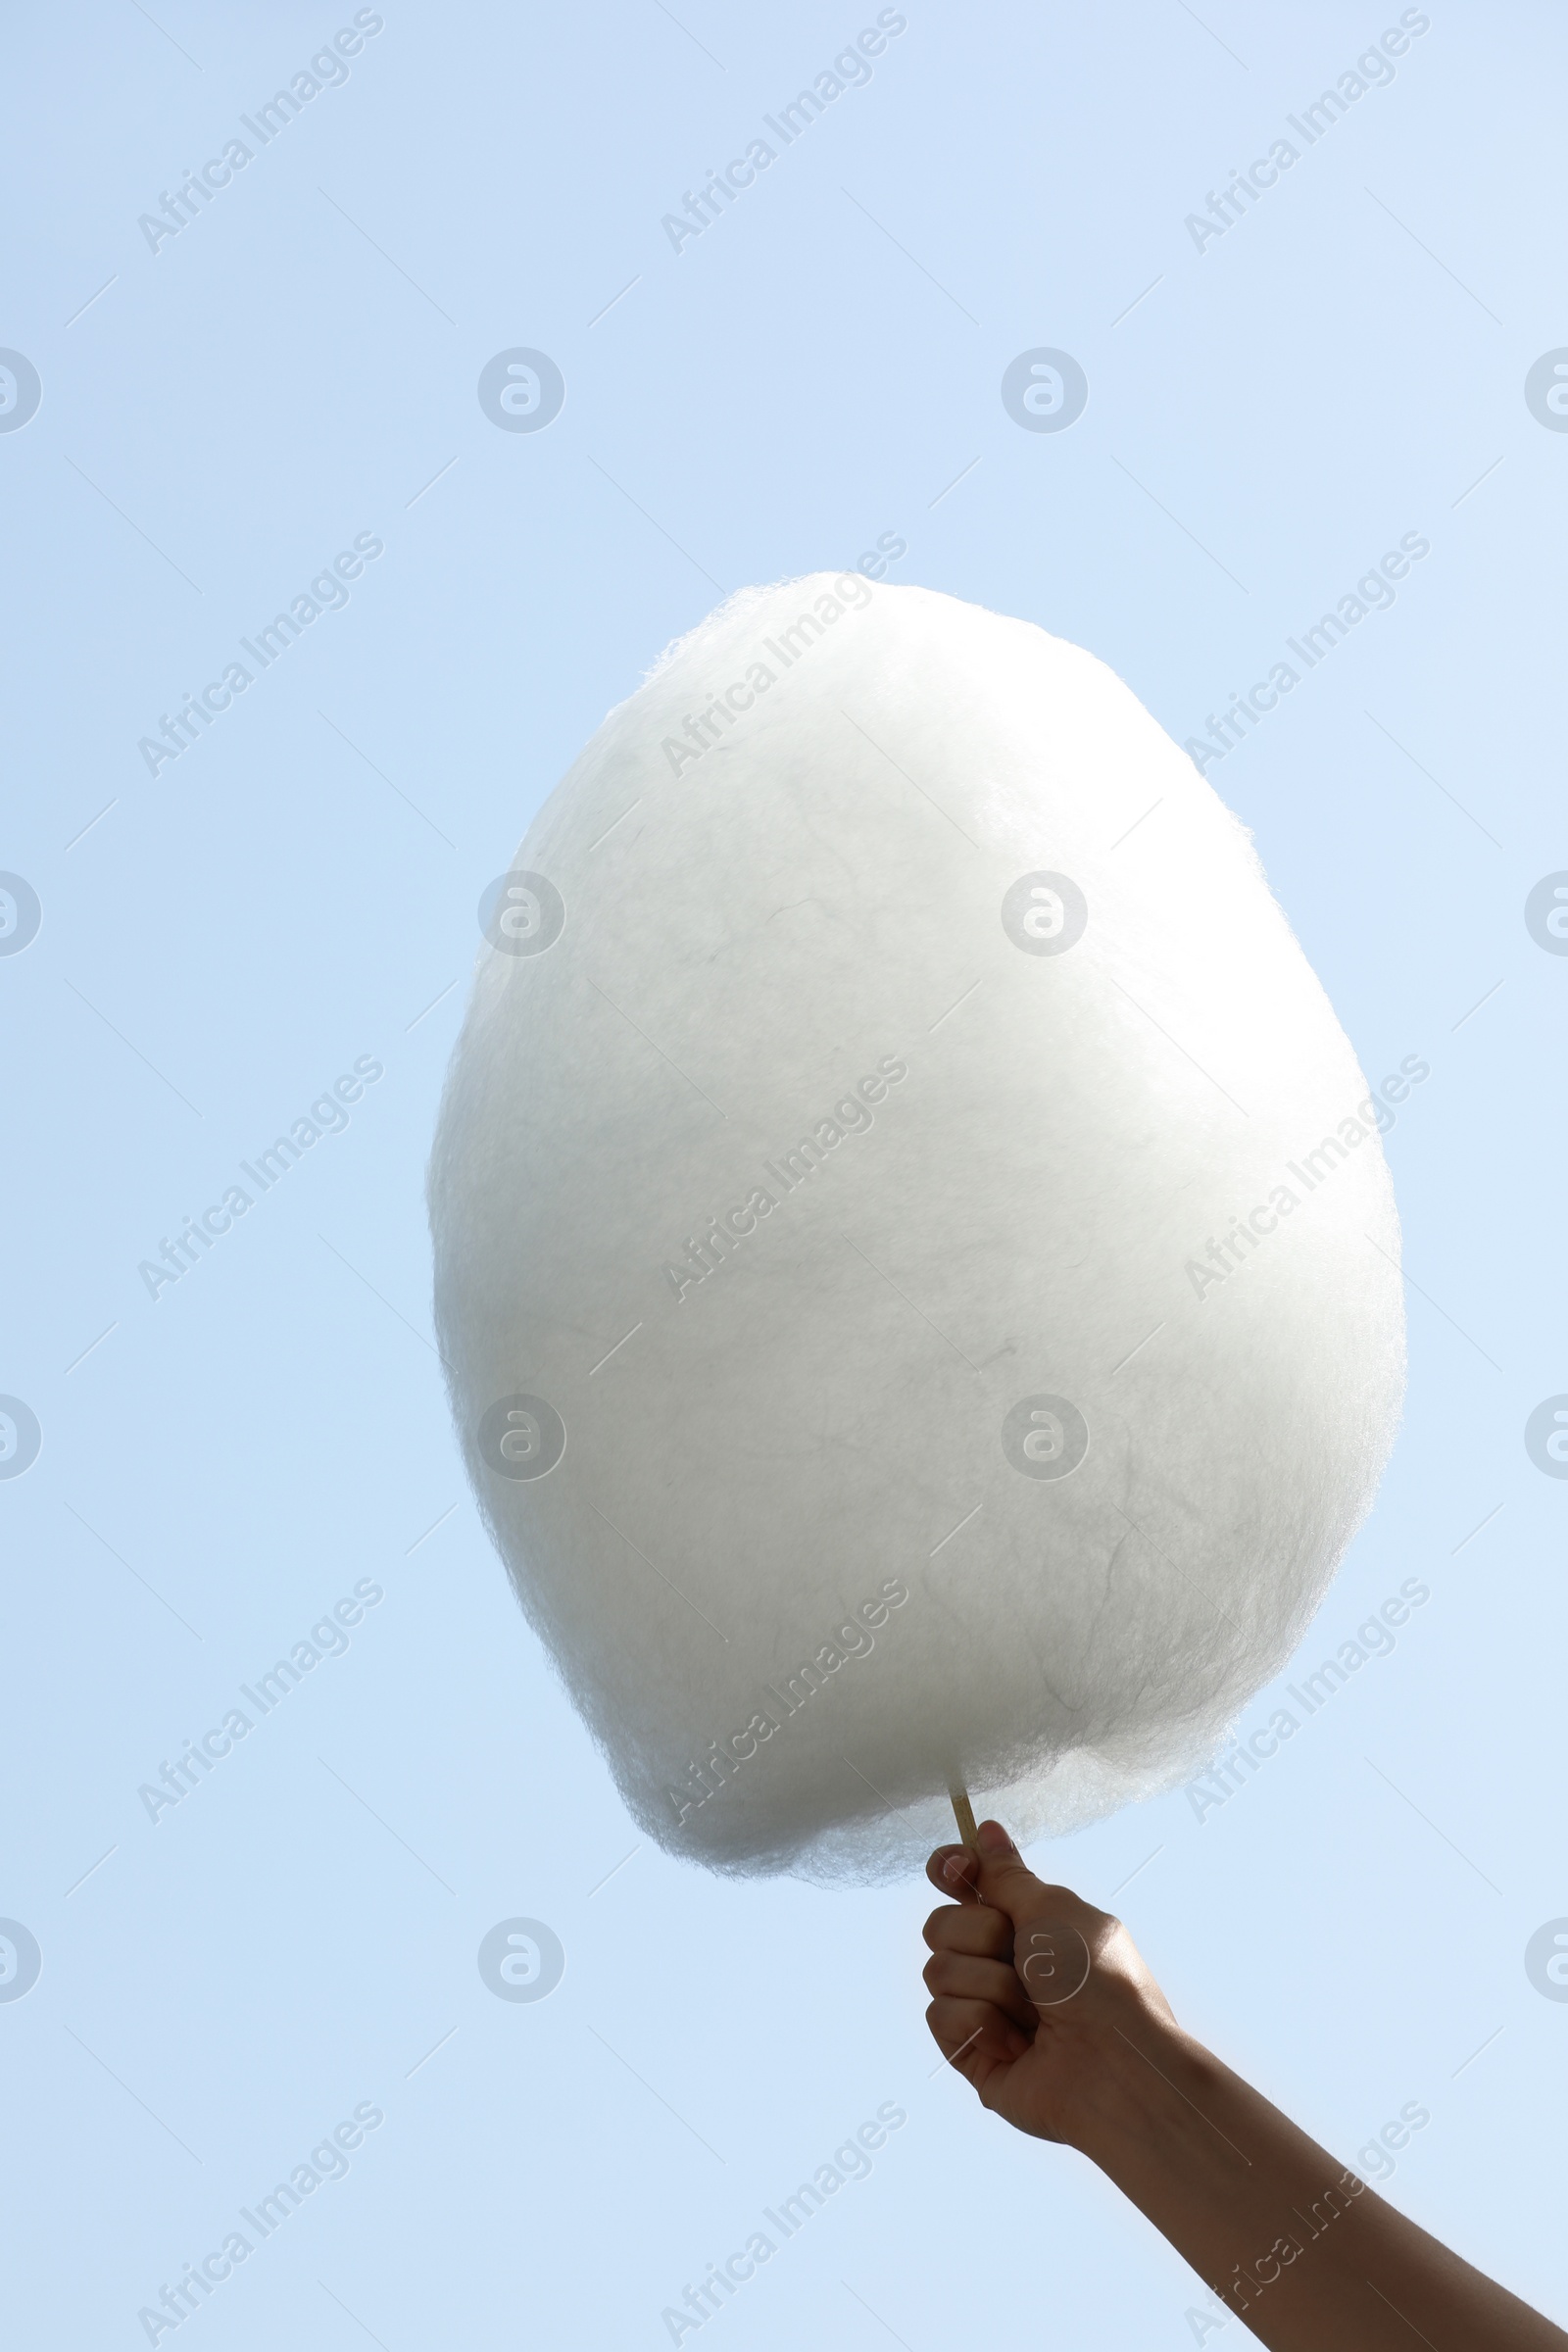 Photo of Woman holding white cotton candy against blue sky, closeup